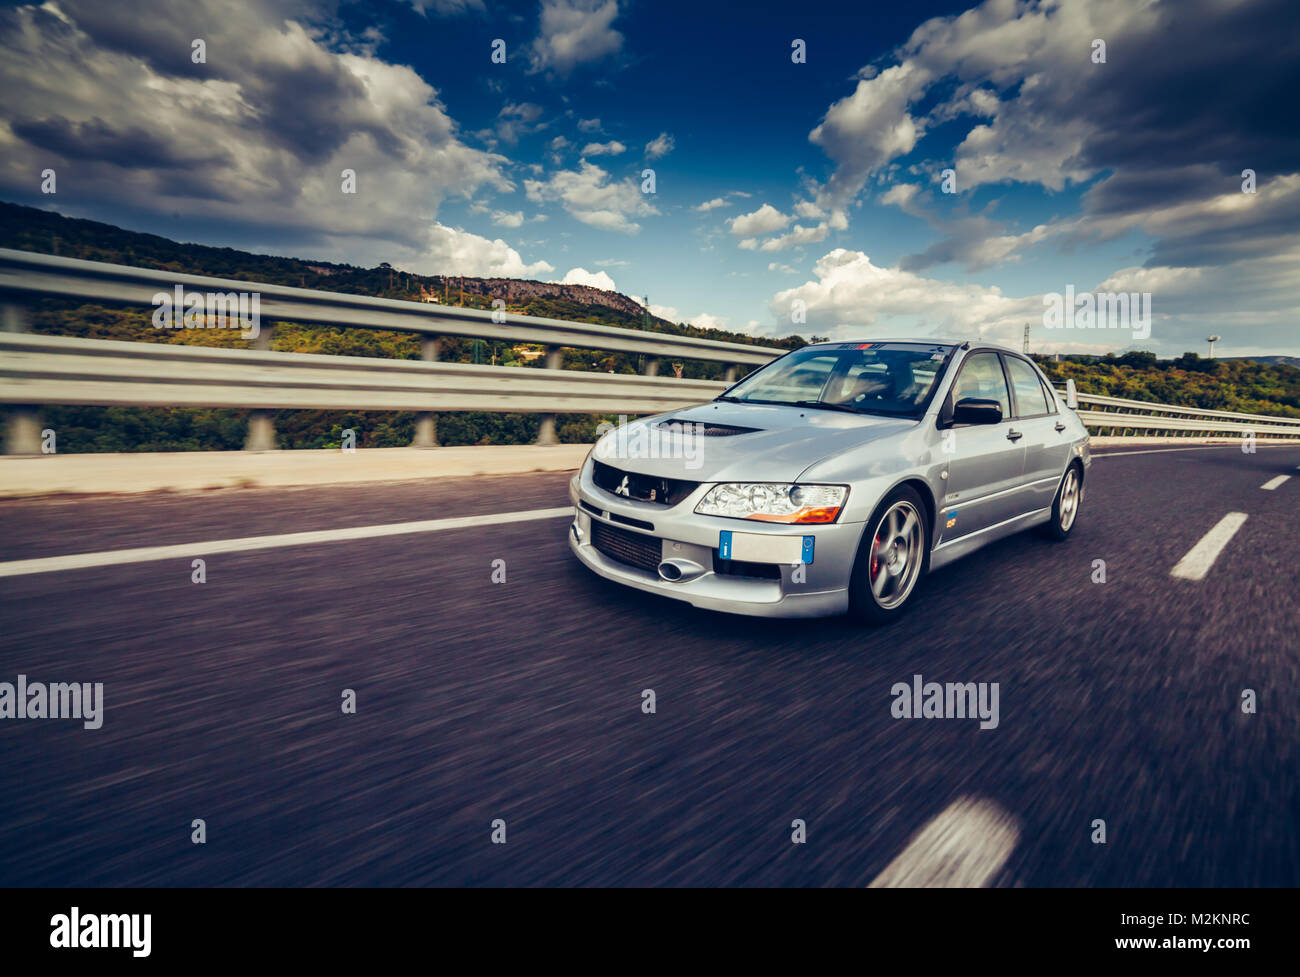 Trieste, Italy - SEPTEMBER 3, 2013: Photo of Mitsubishi EVO 8 .The Lancer Evolution 8 sedan features a newly designed 4B11T 2.0L (1998cc) turbocharged Stock Photo